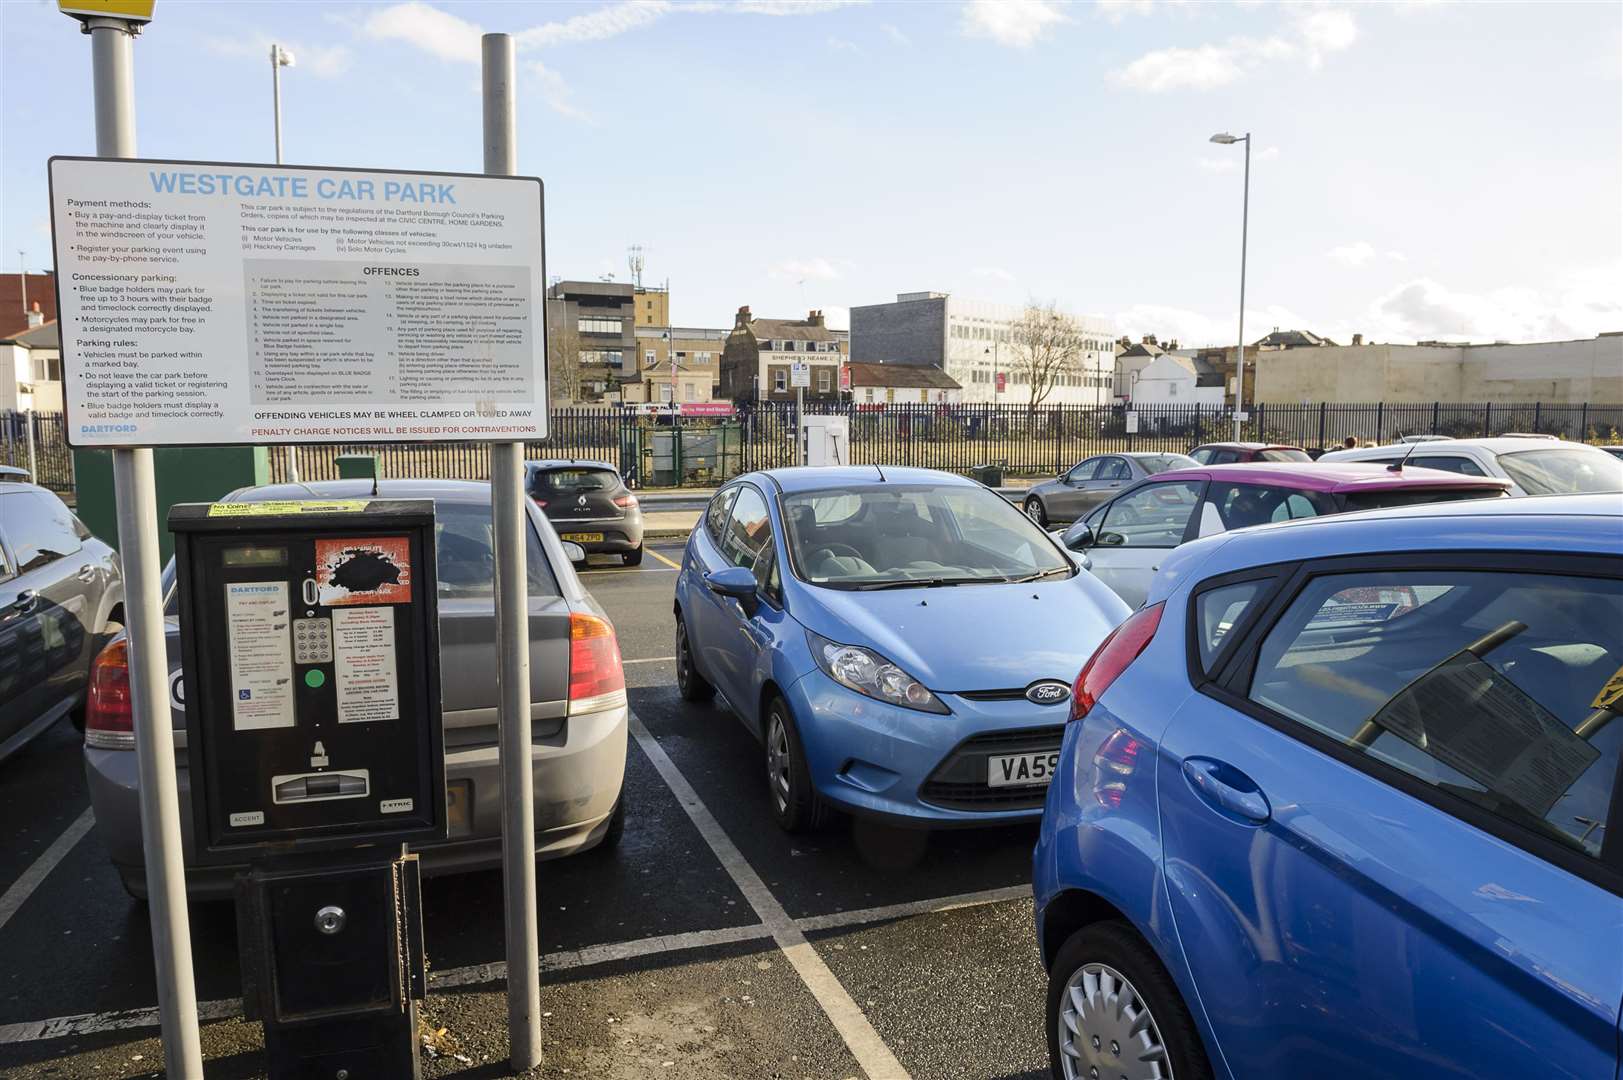 Some of Dartford Council's car parks are run by Parkmobile